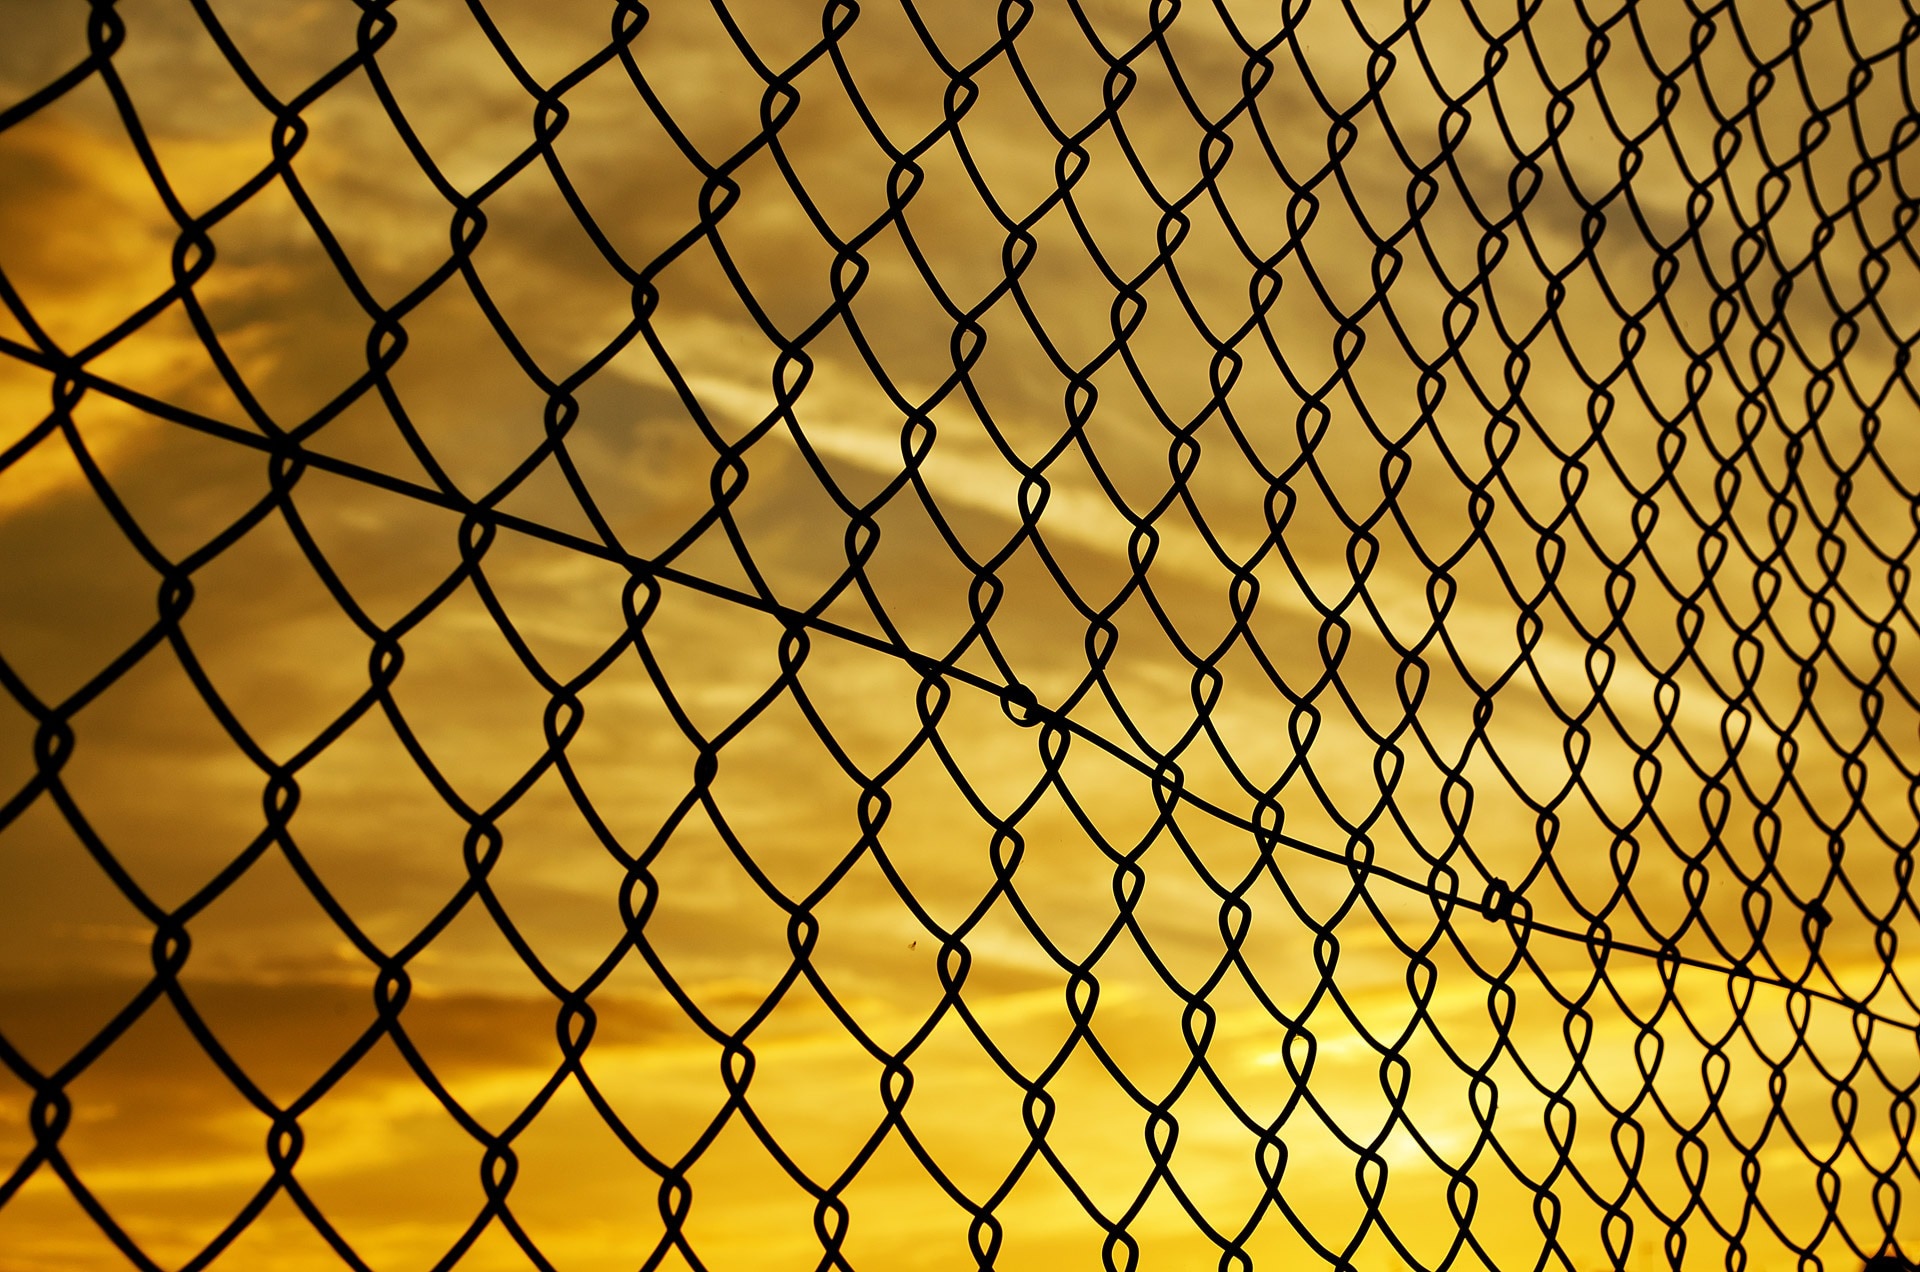 shallow focus photography of cyclone wire fence